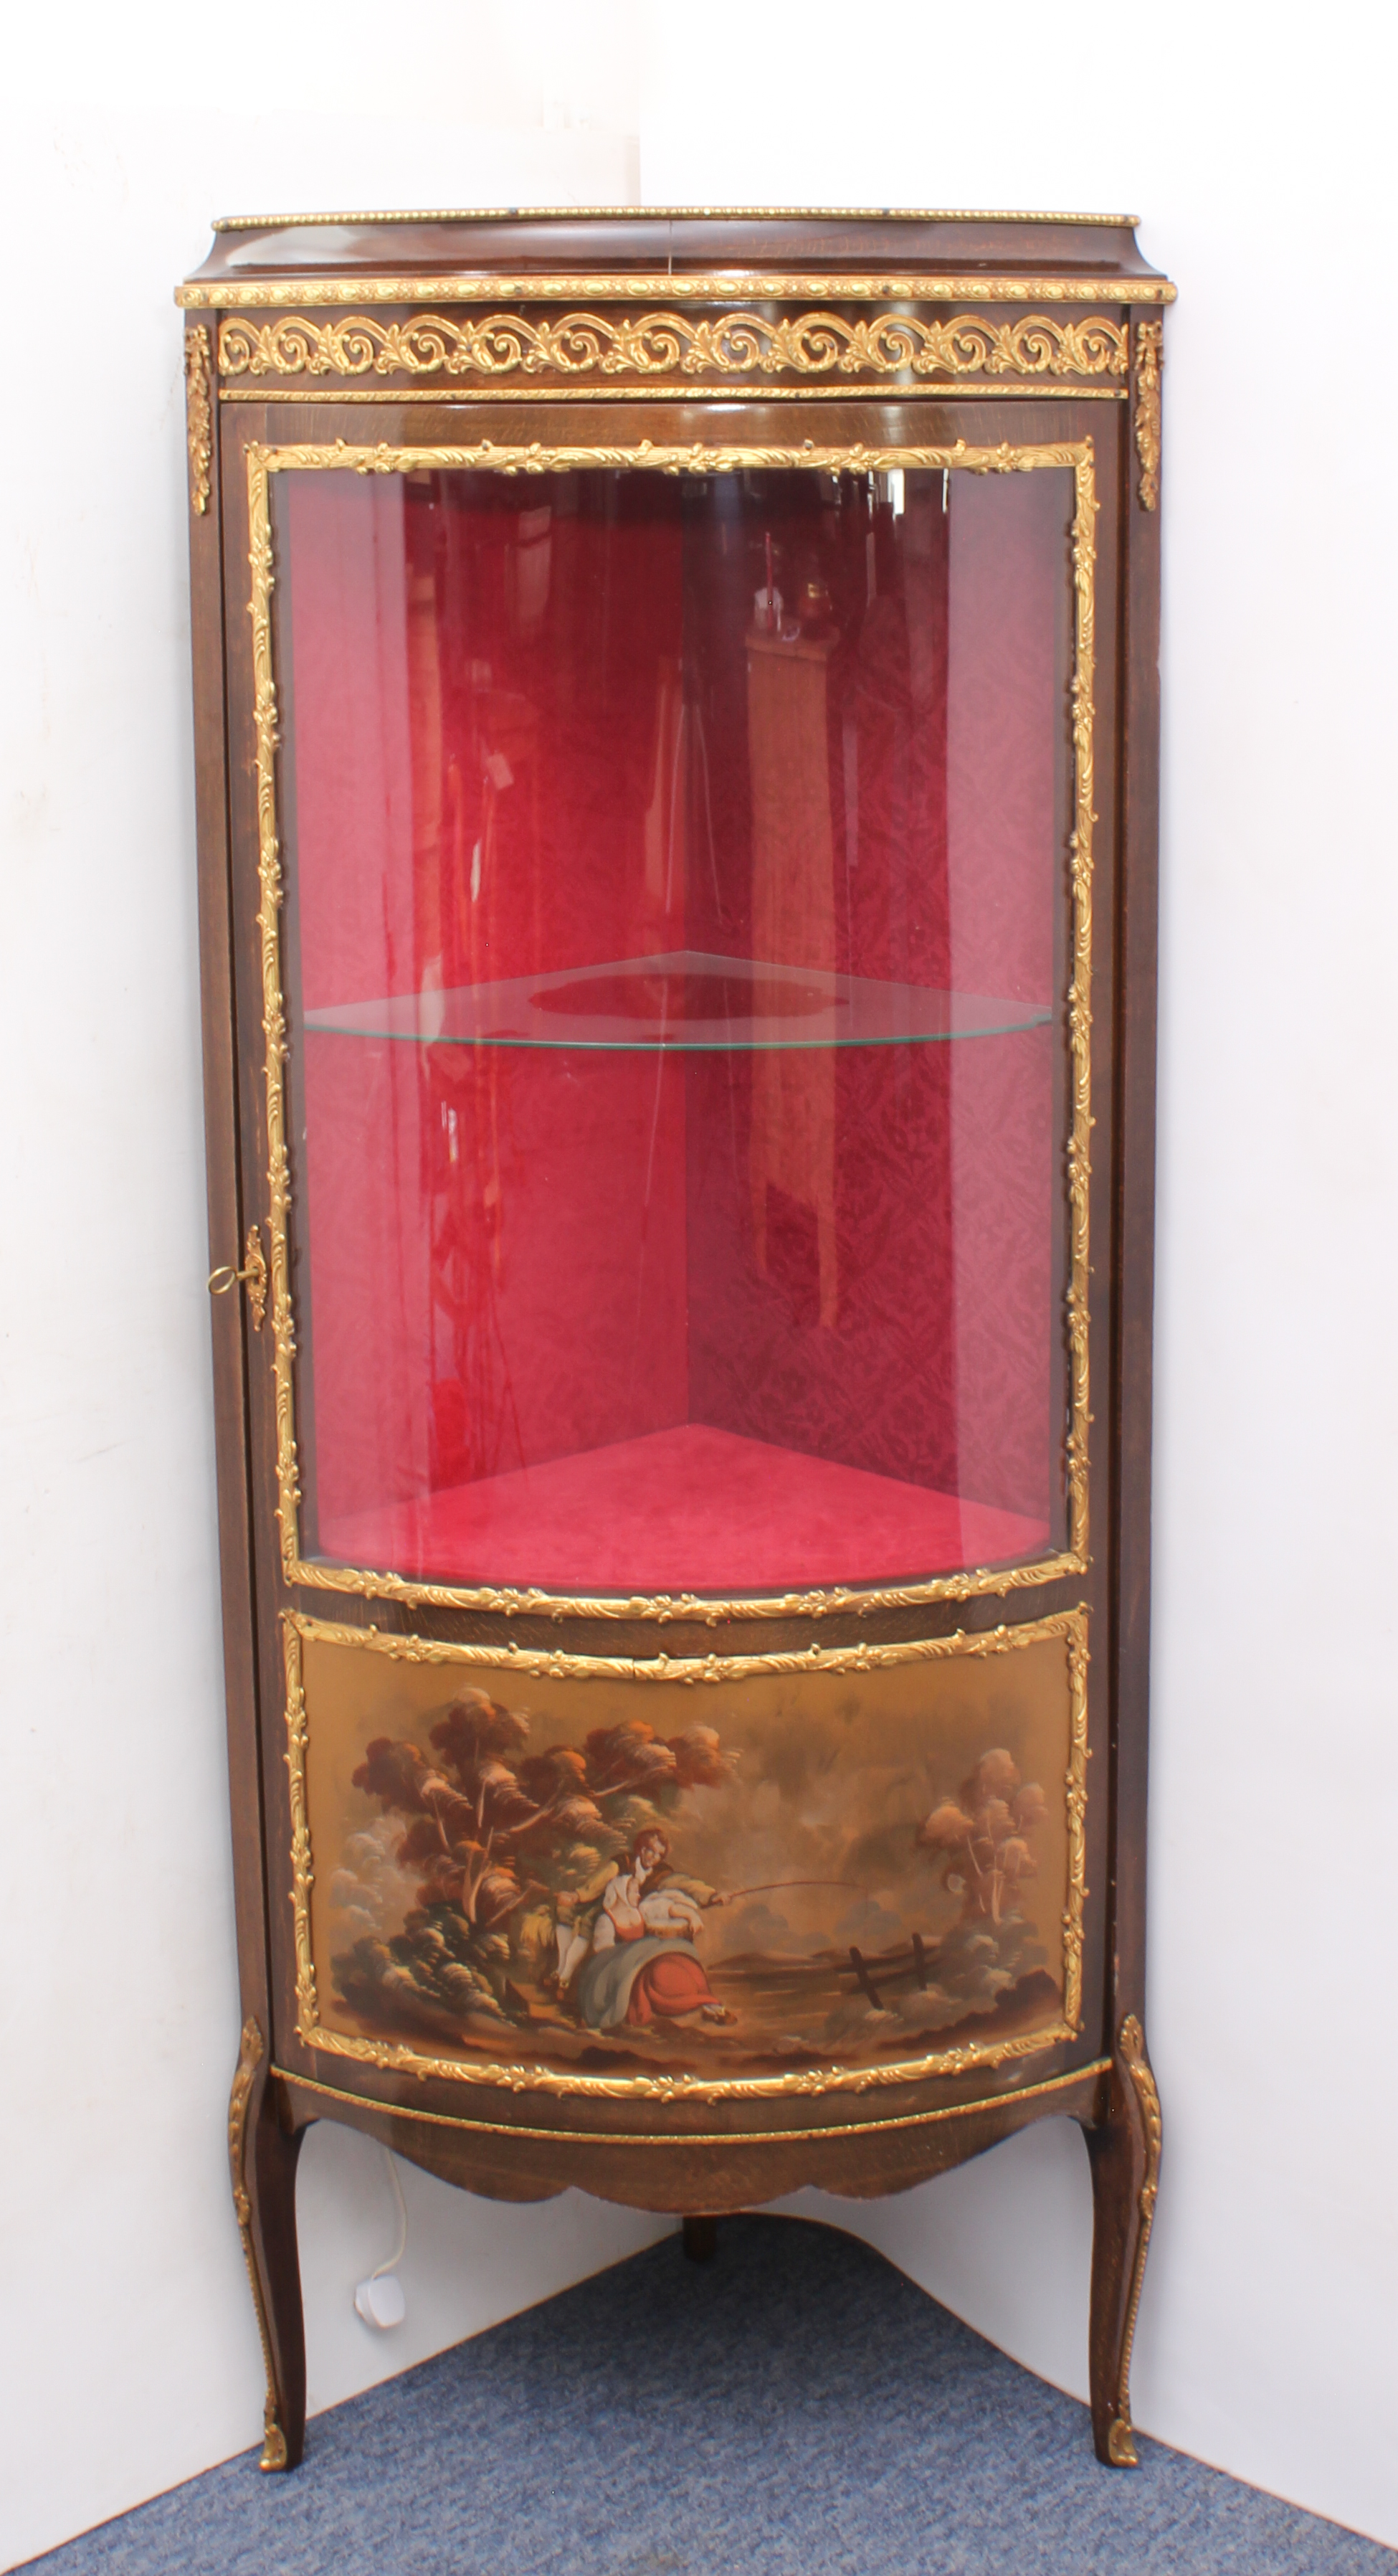 A stained beech wood, vernis martin, gilt-metal and glazed bowfront corner cabinet in the French